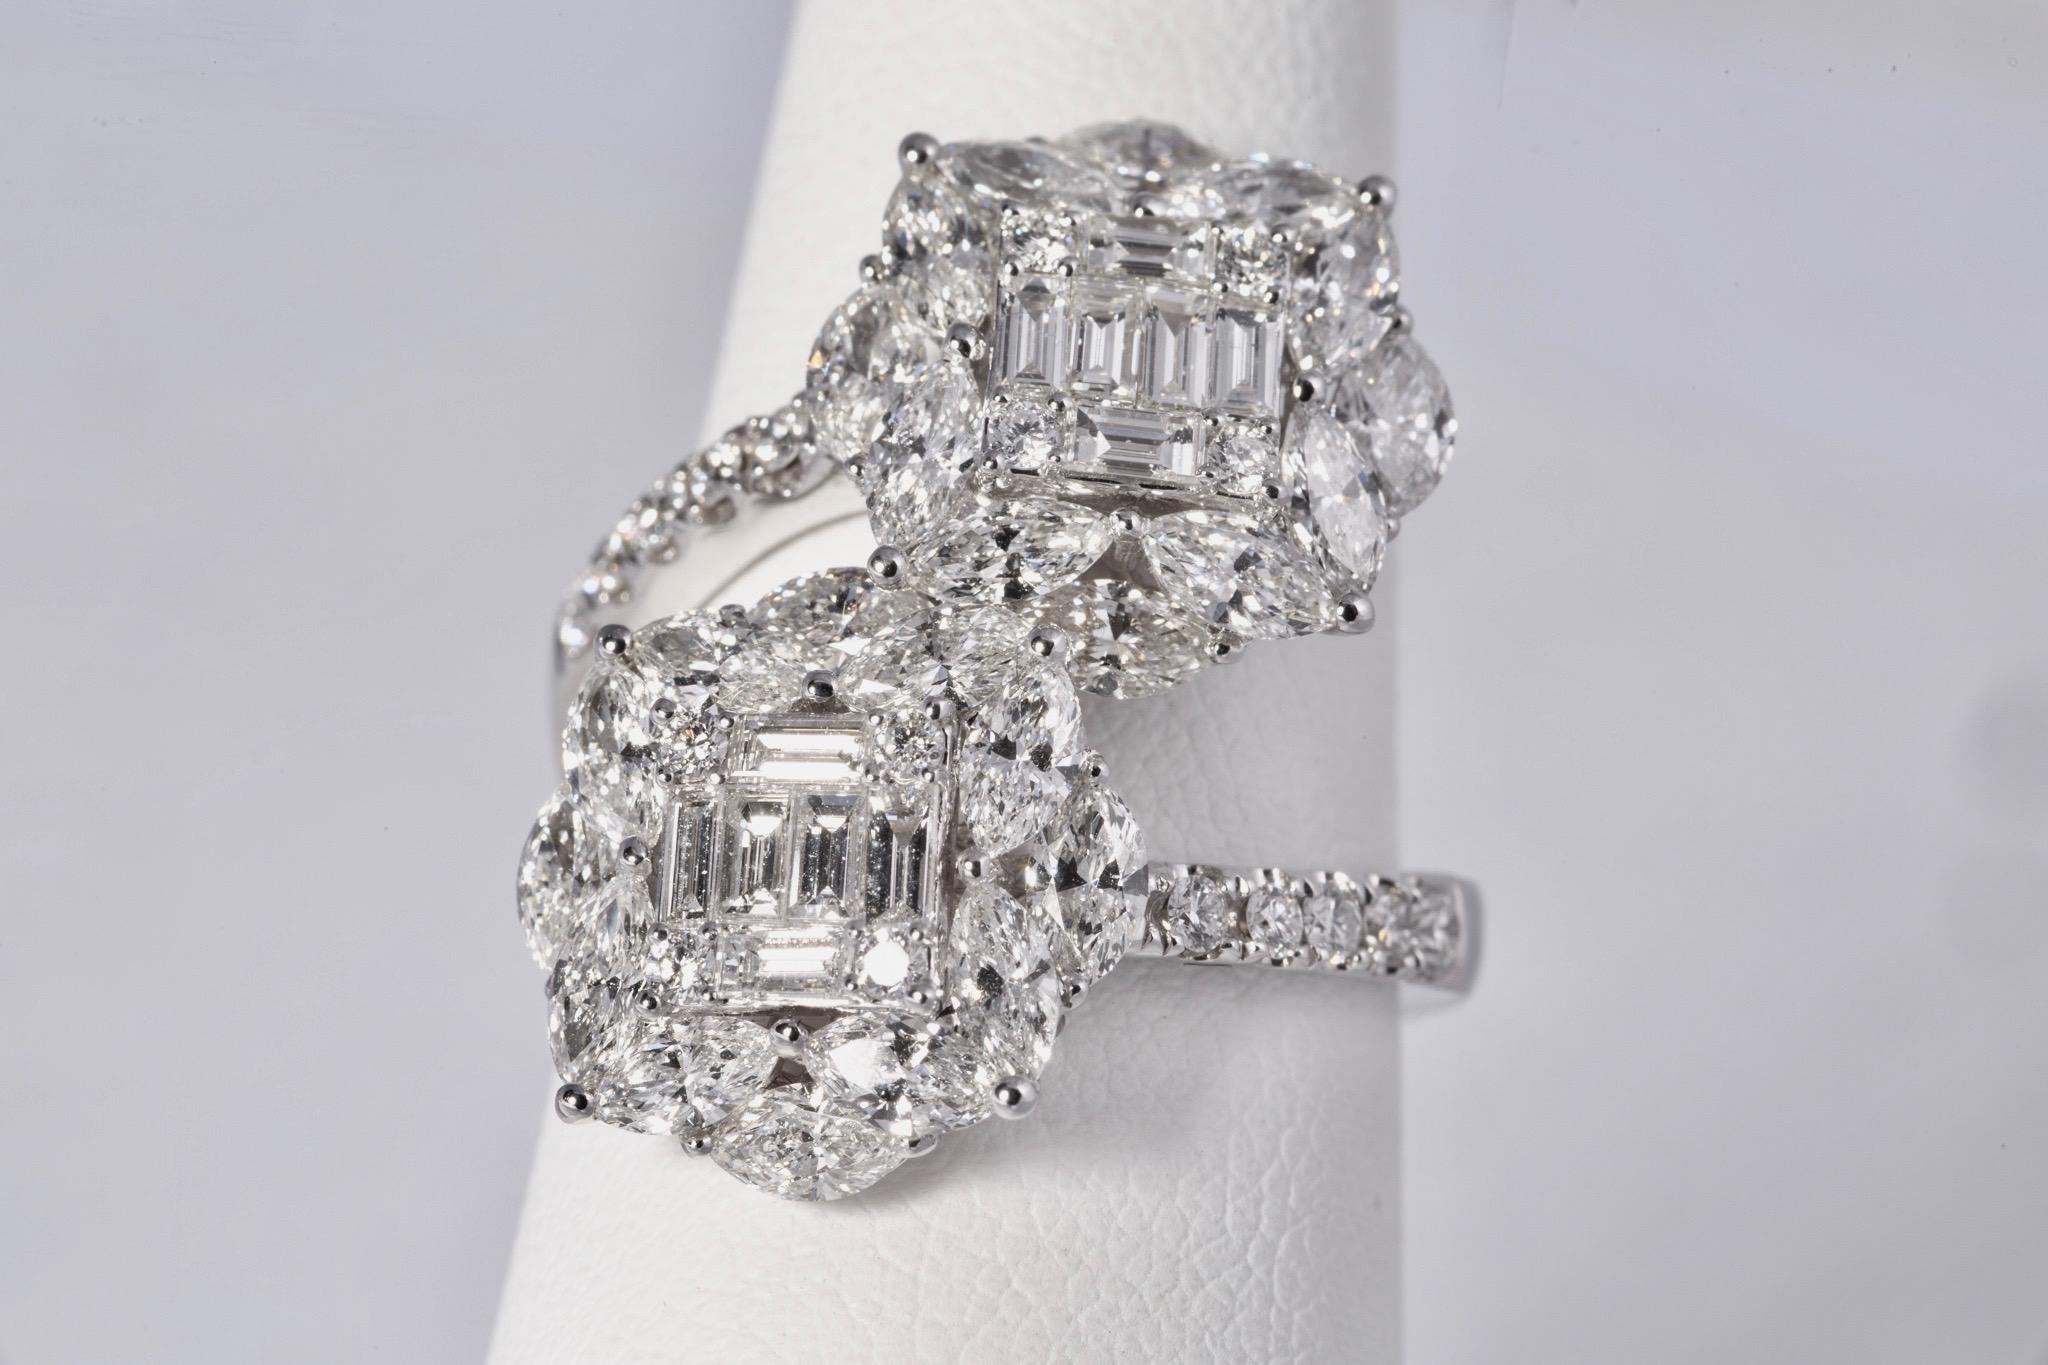 Fabulous diamond cocktail ring with 24 marquise diamonds weighing 2.35cts, 12 baguette cut diamonds weighing .50cts and 18 round cut diamonds weighing .32cts. All diamonds are E-F color and VS clarity. The mounting is 18k white gold. 3.17ct total